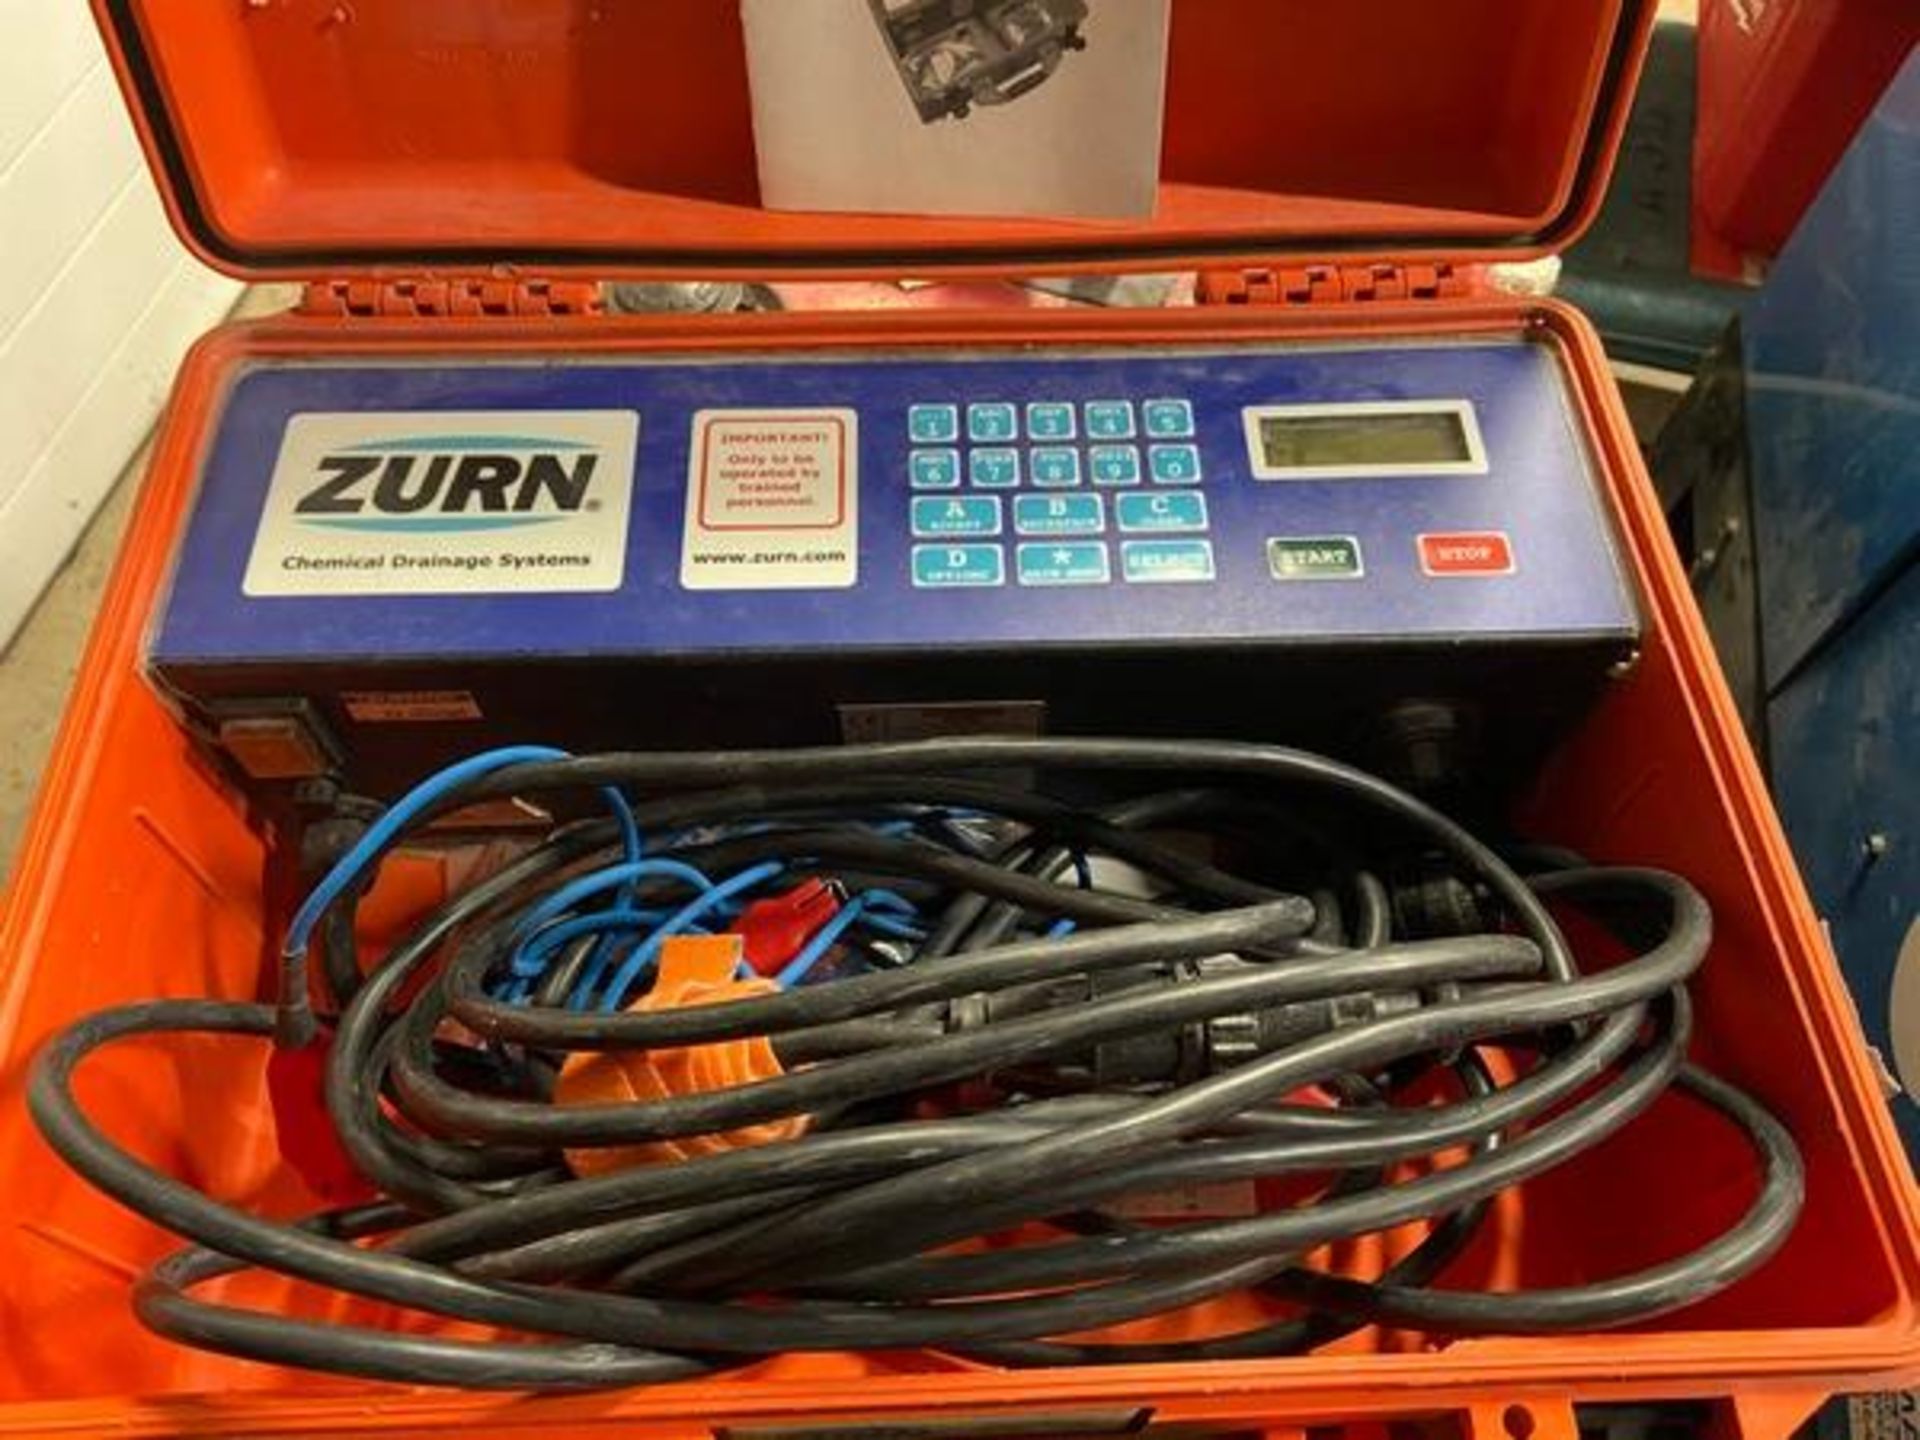 ZURN Chemical Drainage Systems Fusion Lock Welding Unit, In Hard Case (LOCATED IN MONROEVILLE, PA) - Image 2 of 5